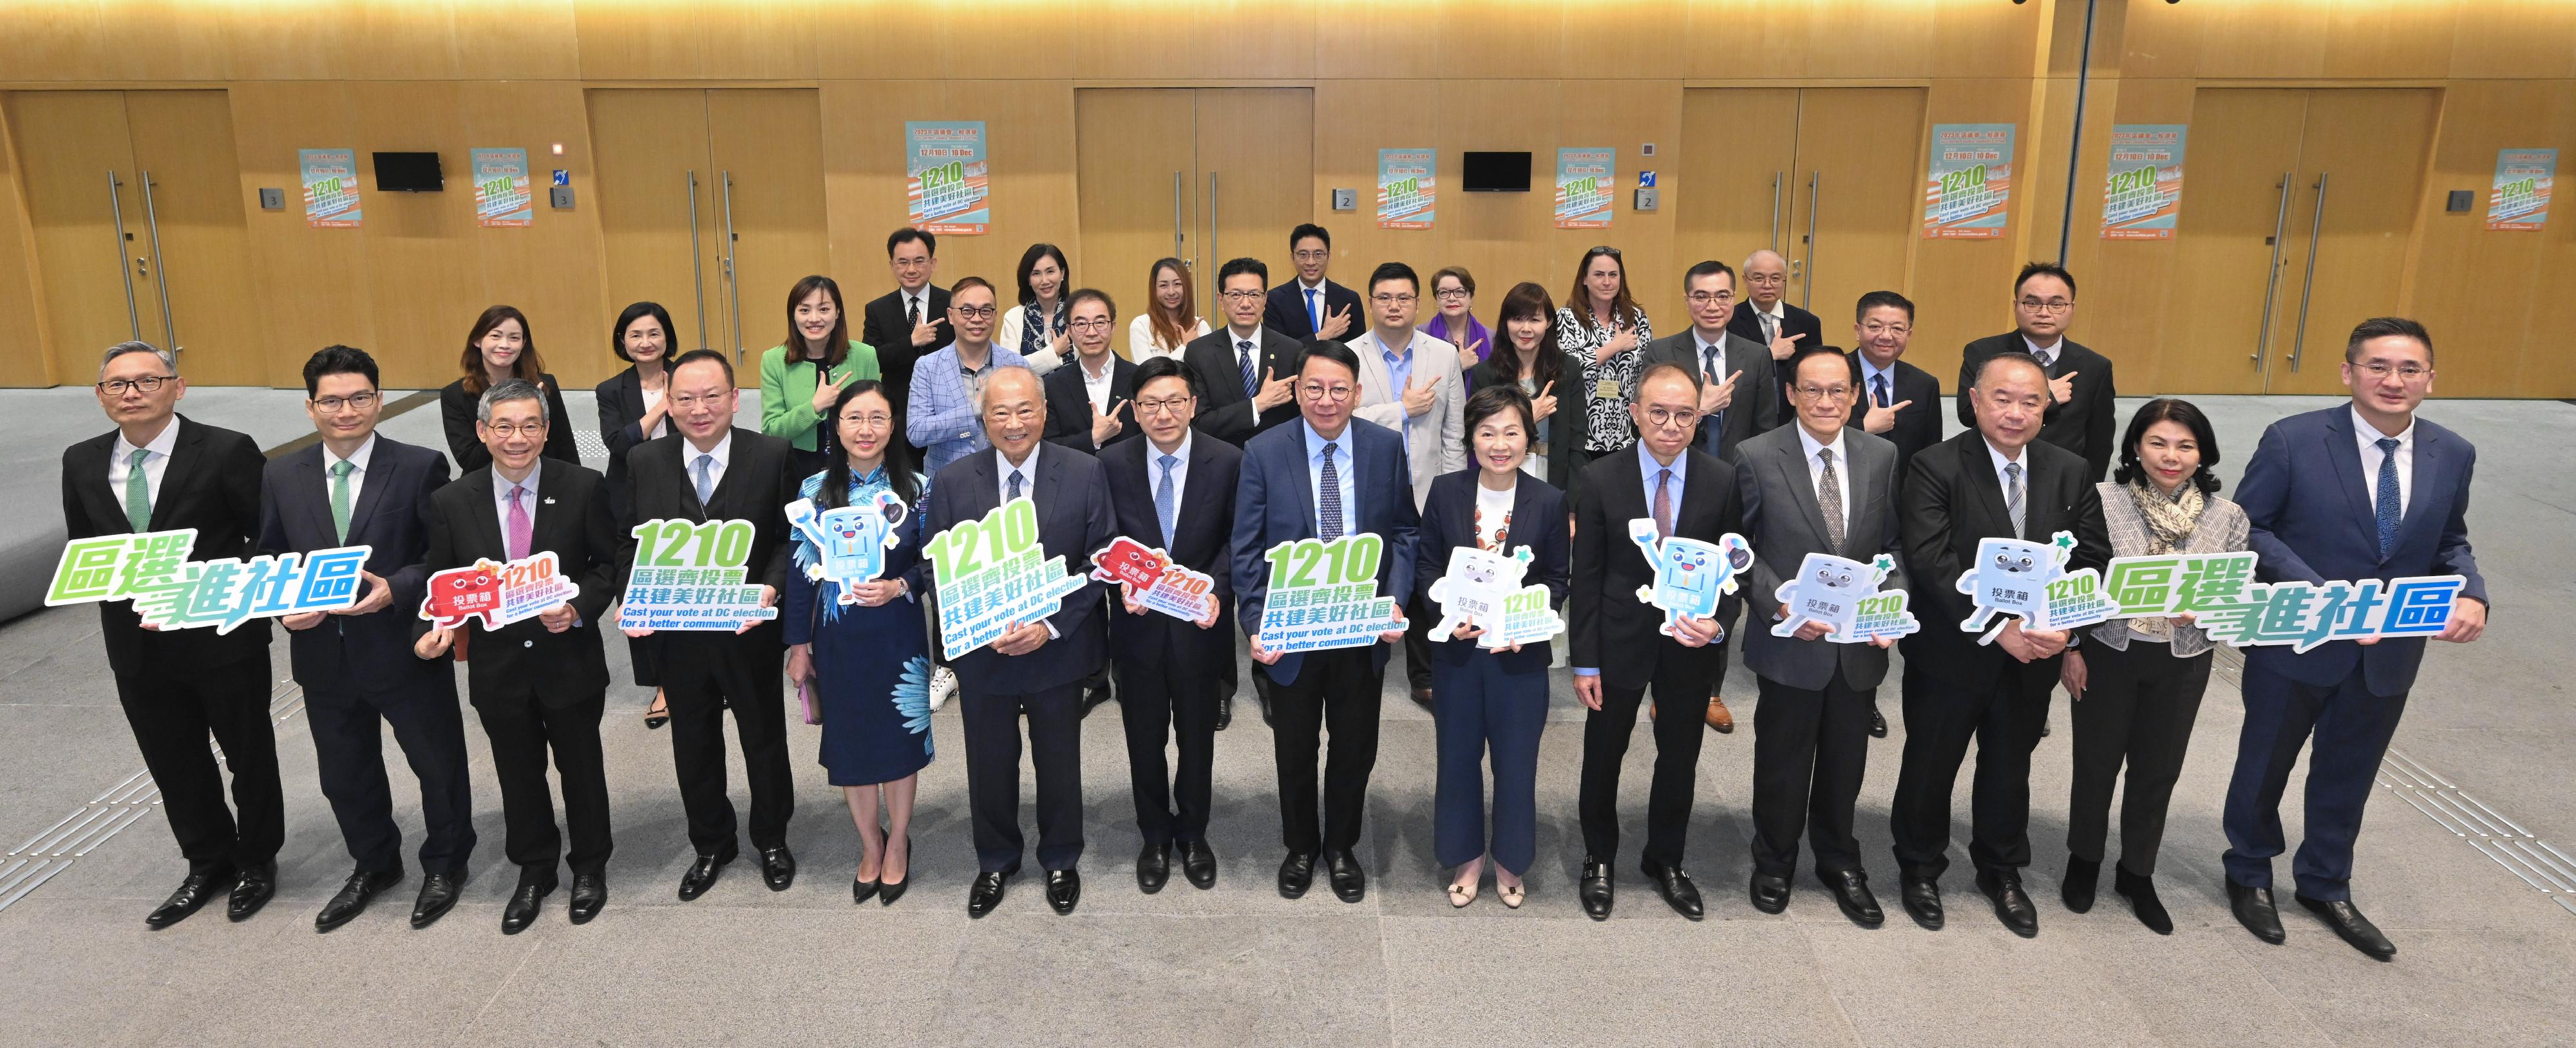 The Chief Secretary for Administration, Mr Chan Kwok-ki, today (November 28) led members of the Human Resources Planning Commission to appeal to the trade and industrial sectors, the professional services sectors, the labour sector, academia and members of the public to vote at the District Council Election on December 10 to fulfil their civic duty. Photo shows (first row, from left) the Under Secretary for Security, Mr Michael Cheuk; the Under Secretary for Financial Services and the Treasury, Mr Joseph Chan; the Chairman of the Vocational Training Council, Mr Tony Tai; the Chairman of the Hong Kong Council for Accreditation of Academic and Vocational Qualifications, Mr Rock Chen; the Permanent Secretary for Labour and Welfare, Ms Alice Lau; Mr Chow Chung-kong; the Secretary for Labour and Welfare, Mr Chris Sun; Mr Chan Kwok-ki; the Secretary for Education, Dr Choi Yuk-lin; the Secretary for Constitutional and Mainland Affairs, Mr Erick Tsang Kwok-wai; Professor Edward Chen; the Chairman of the Employees Retraining Board, Mr Yu Pang-chun; Ms Cordelia Chung; the Under Secretary for Commerce and Economic Development, Dr Bernard Chan, and members.